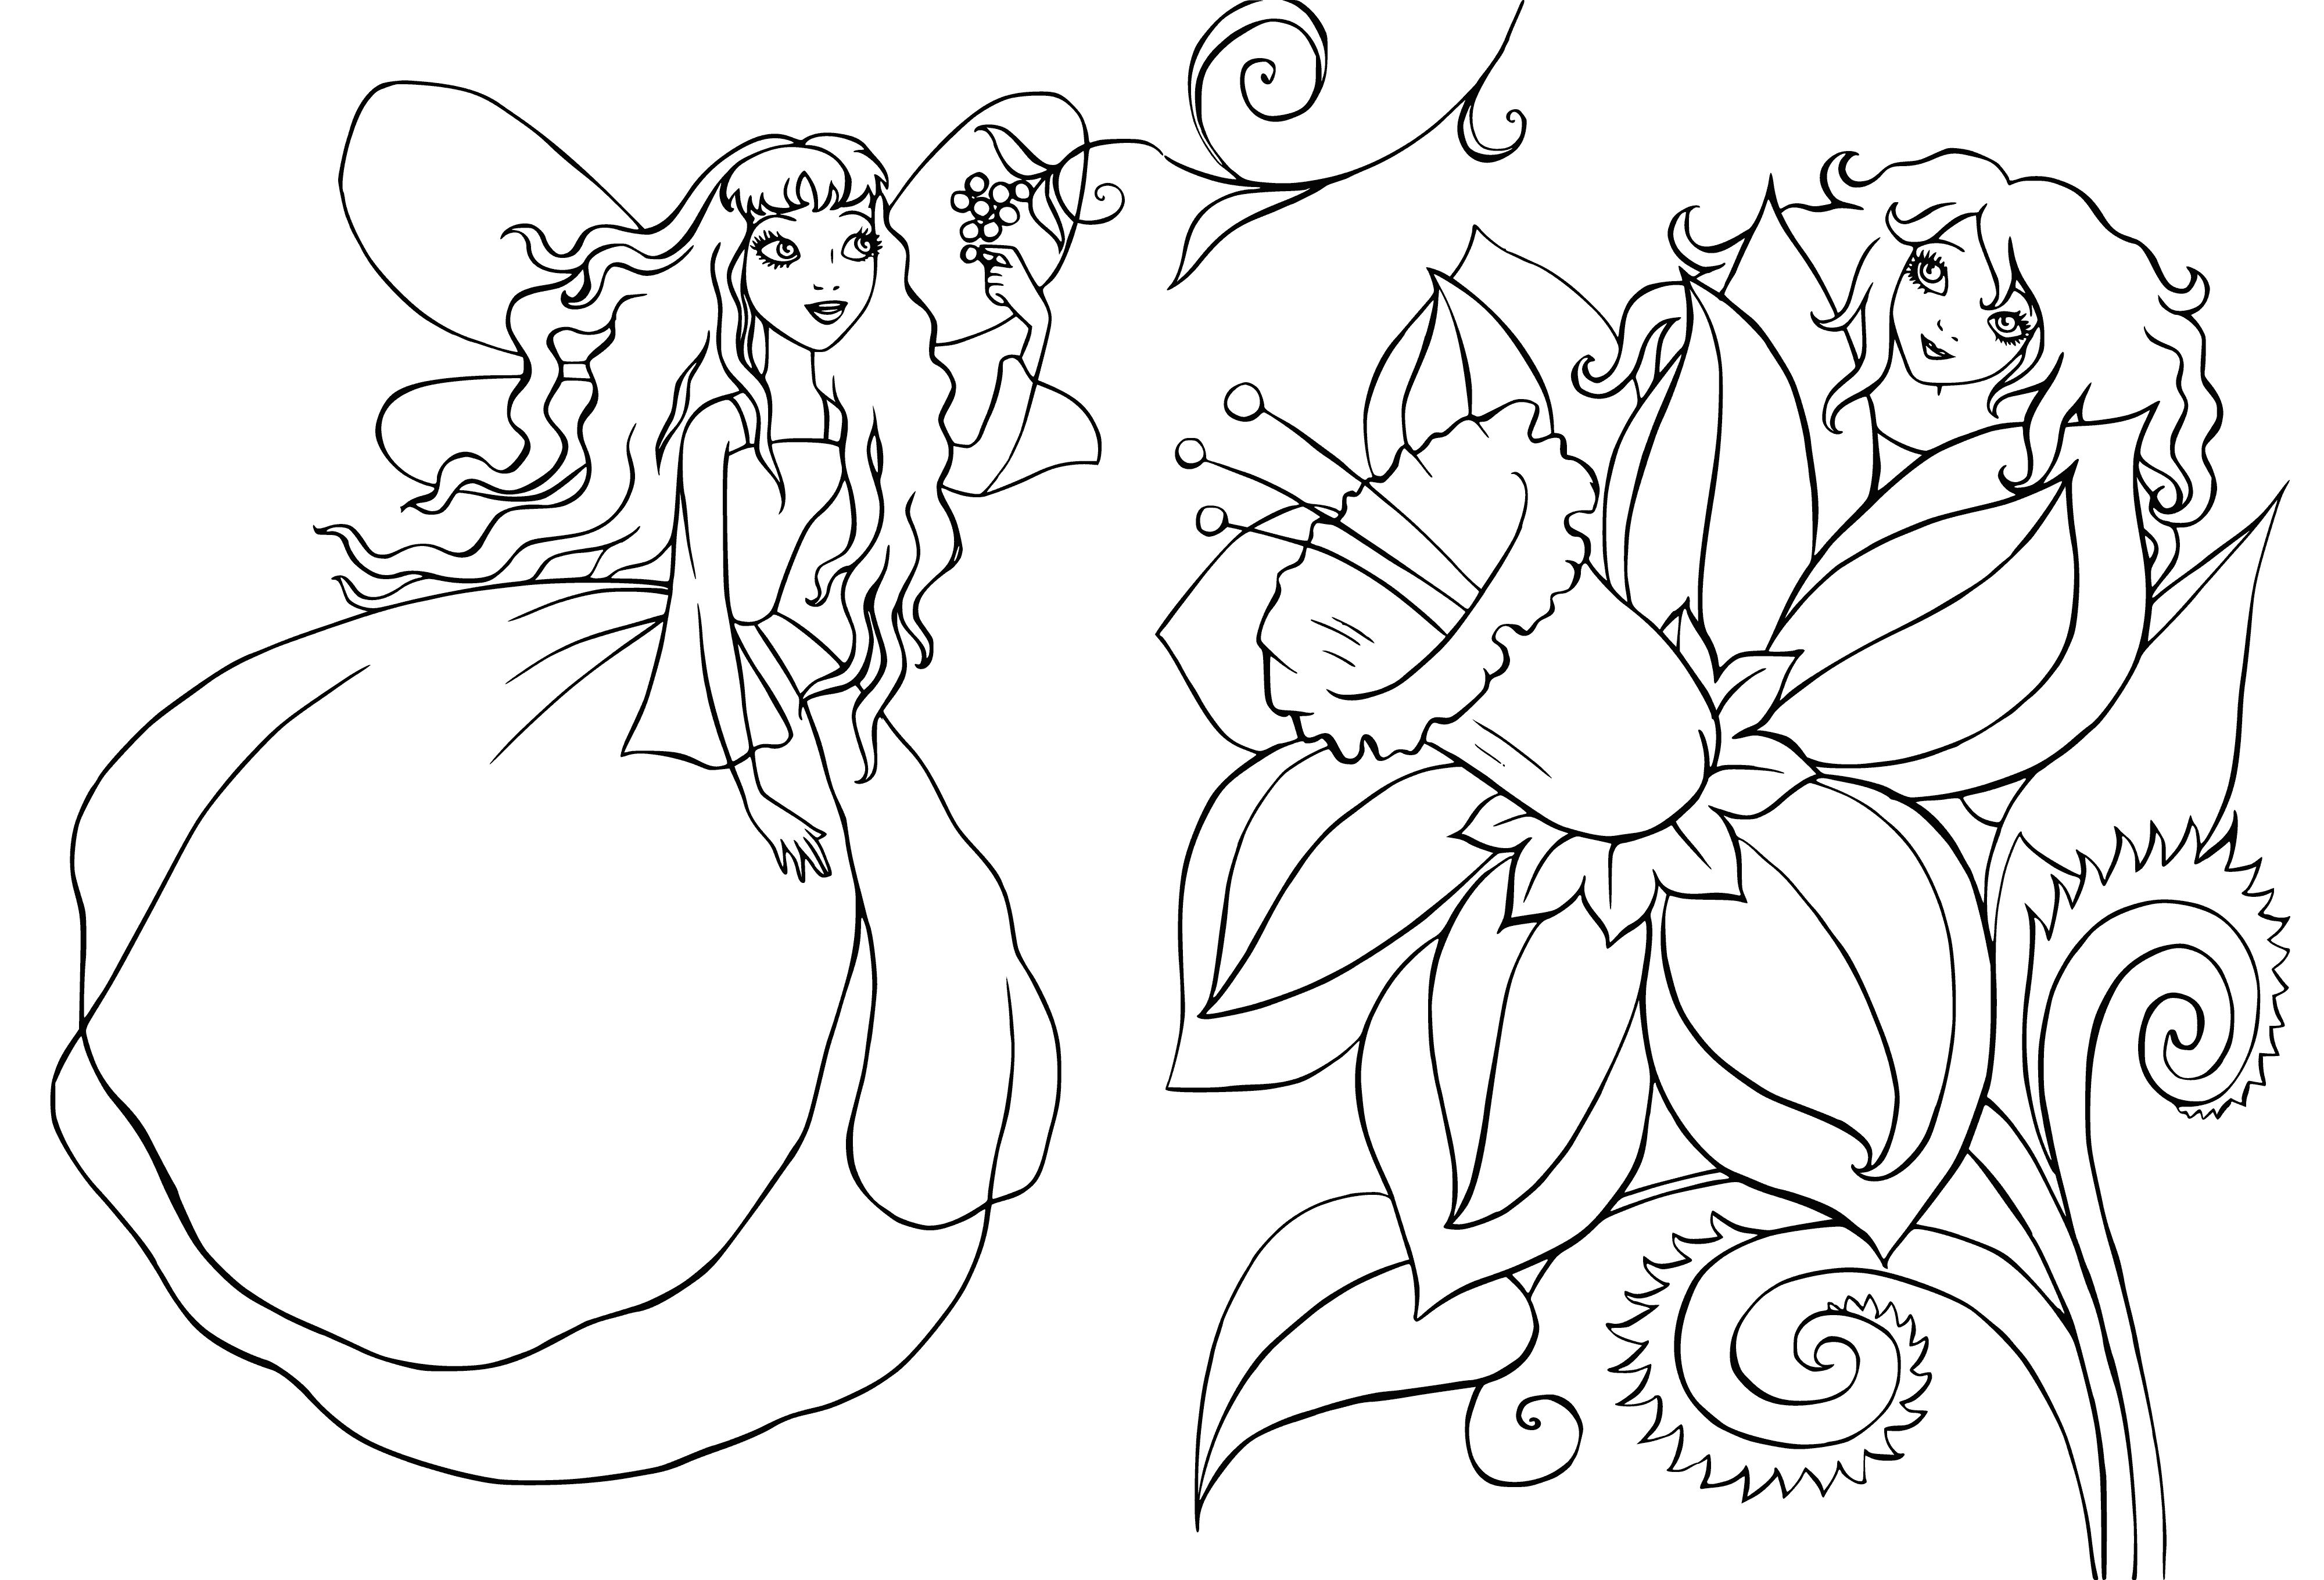 coloring page: Elves welcome all into their beautiful, majestic kingdom full of tall trees, green meadows, and glittering waterways. They are kind & magical, always ready to help.